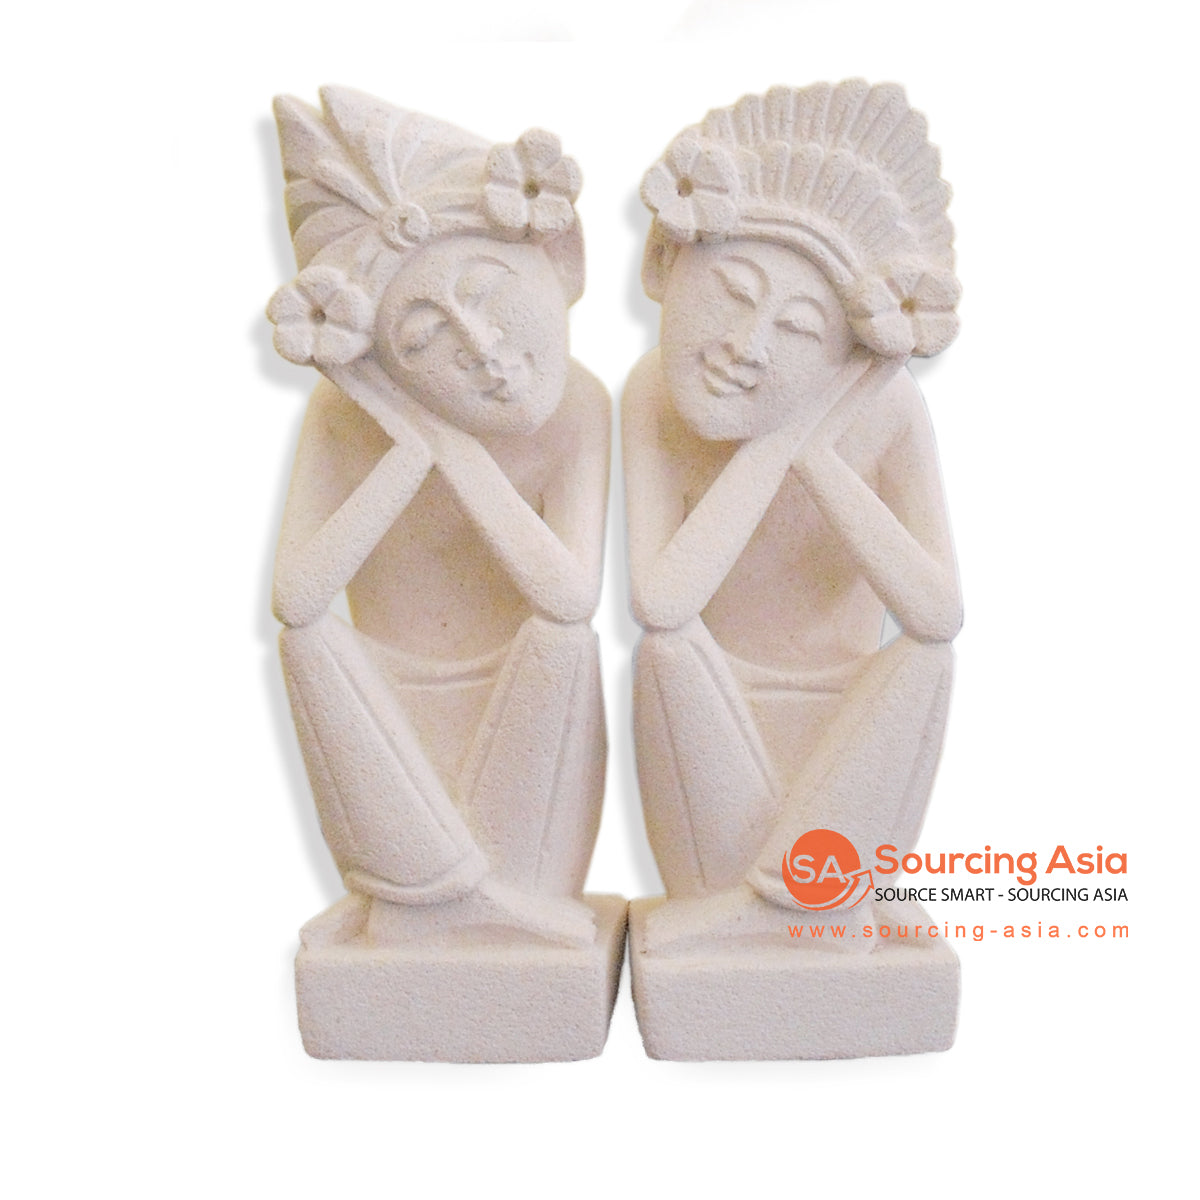 MHB046-15-1 STONE DREAMING BALINESE COUPLE STATUE